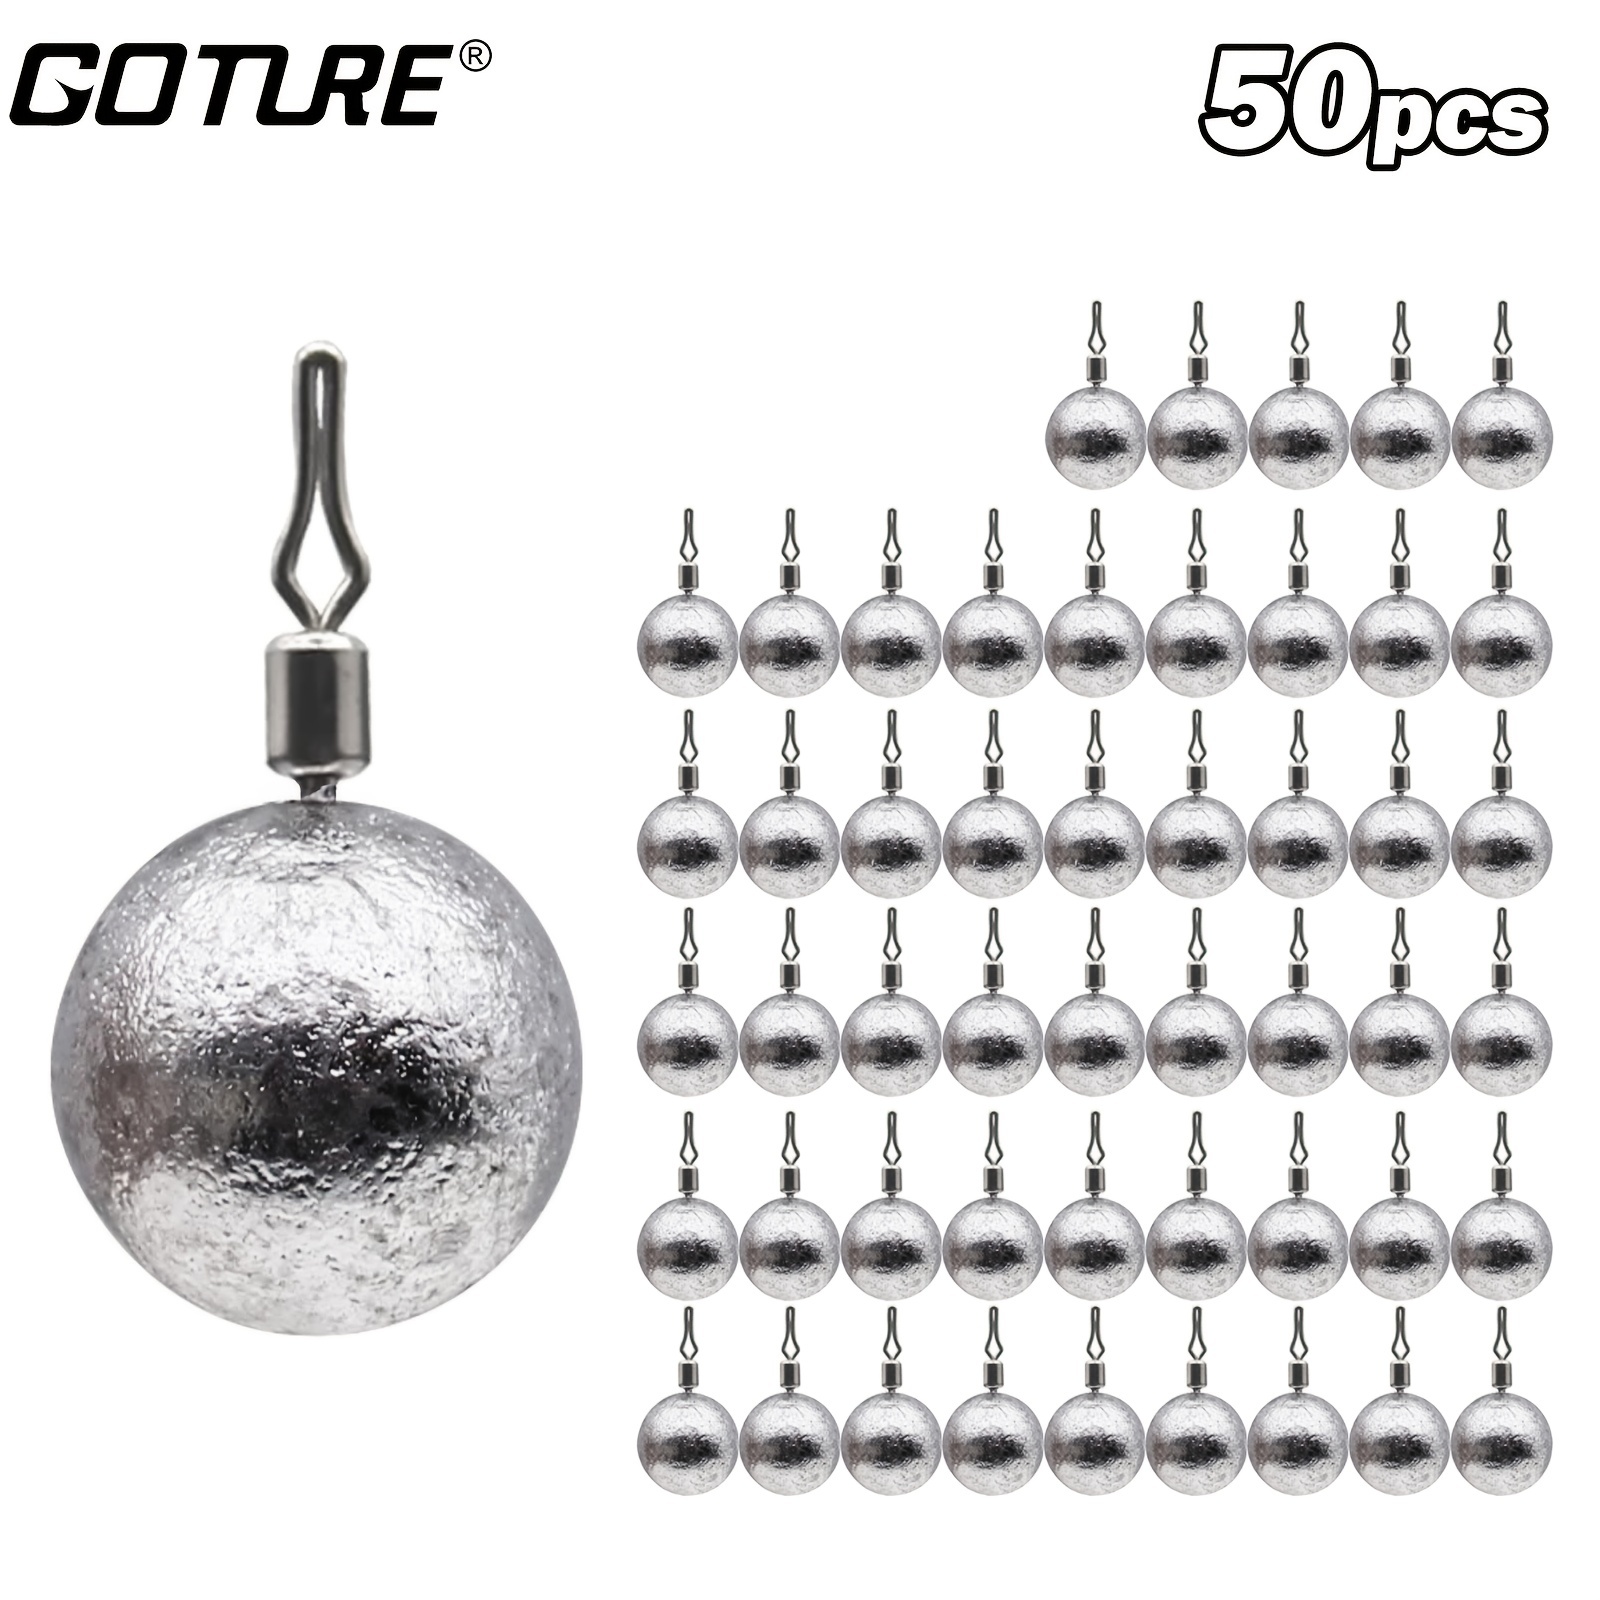 Wholesale Round Shape Cannonball Fishing Weights Sinkers 